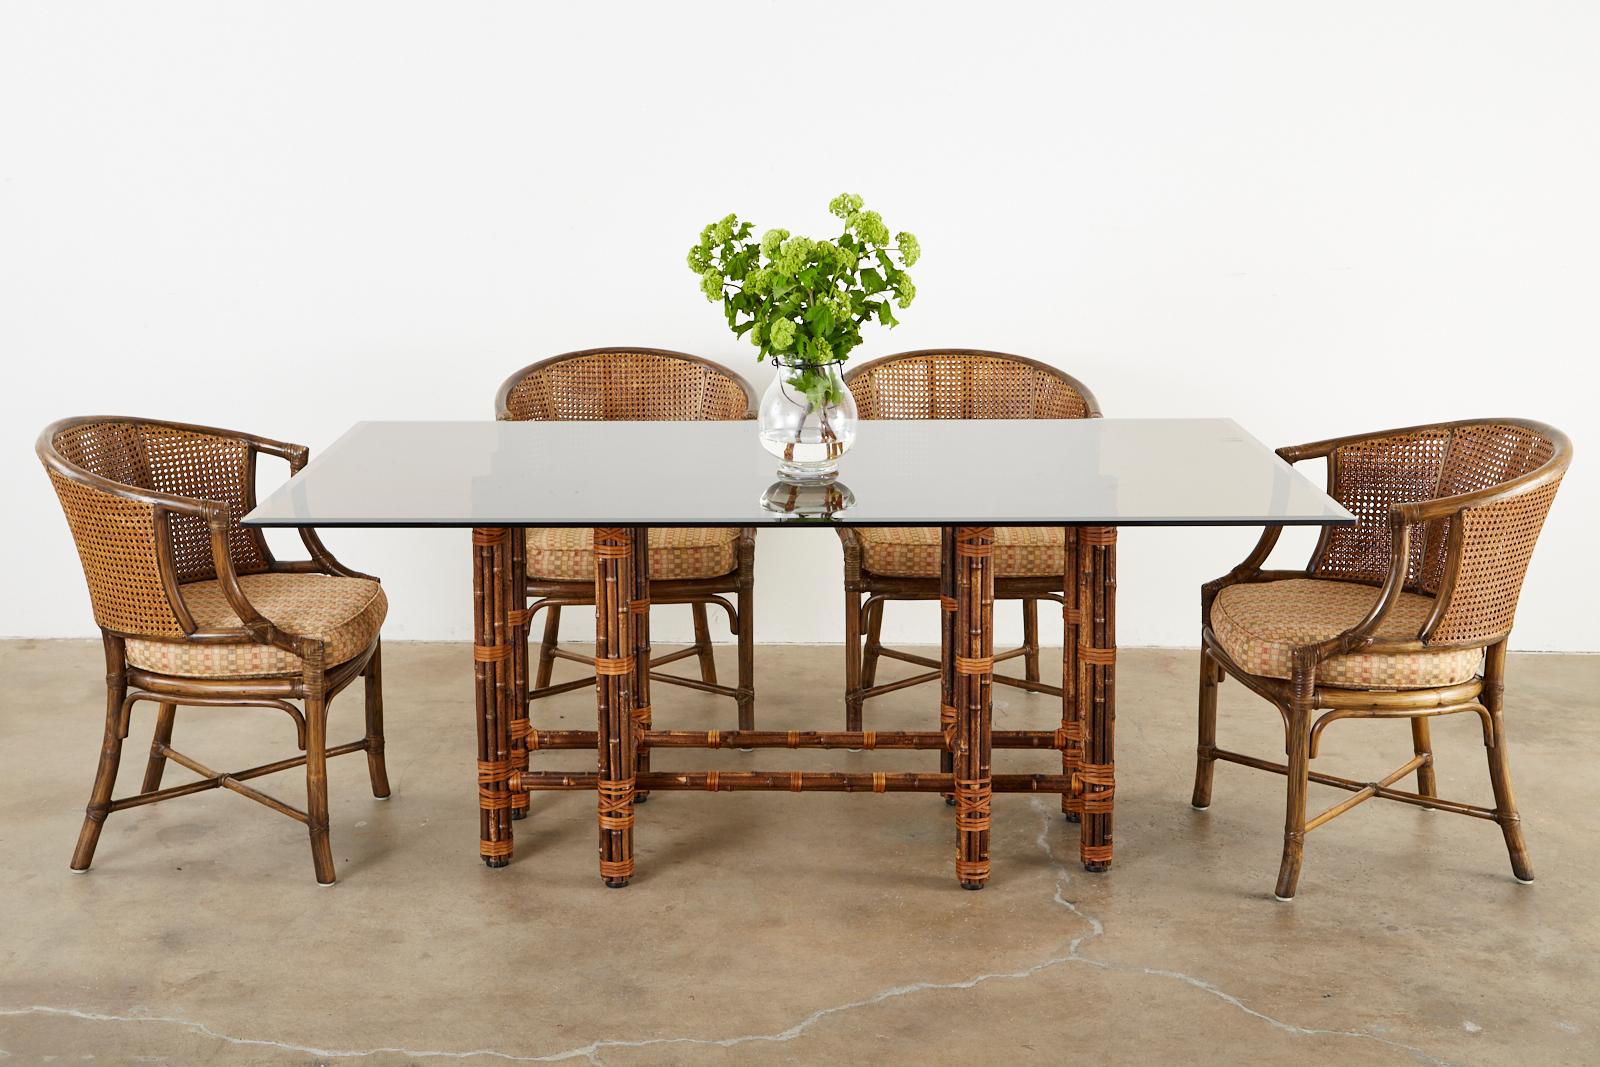 Handsome set of four genuine McGuire dining chairs or armchairs made in the California organic modern style. The iconic barrel formed rattan chairs feature a double caned seat back. The rattan pole on the back gracefully curves down to the arm